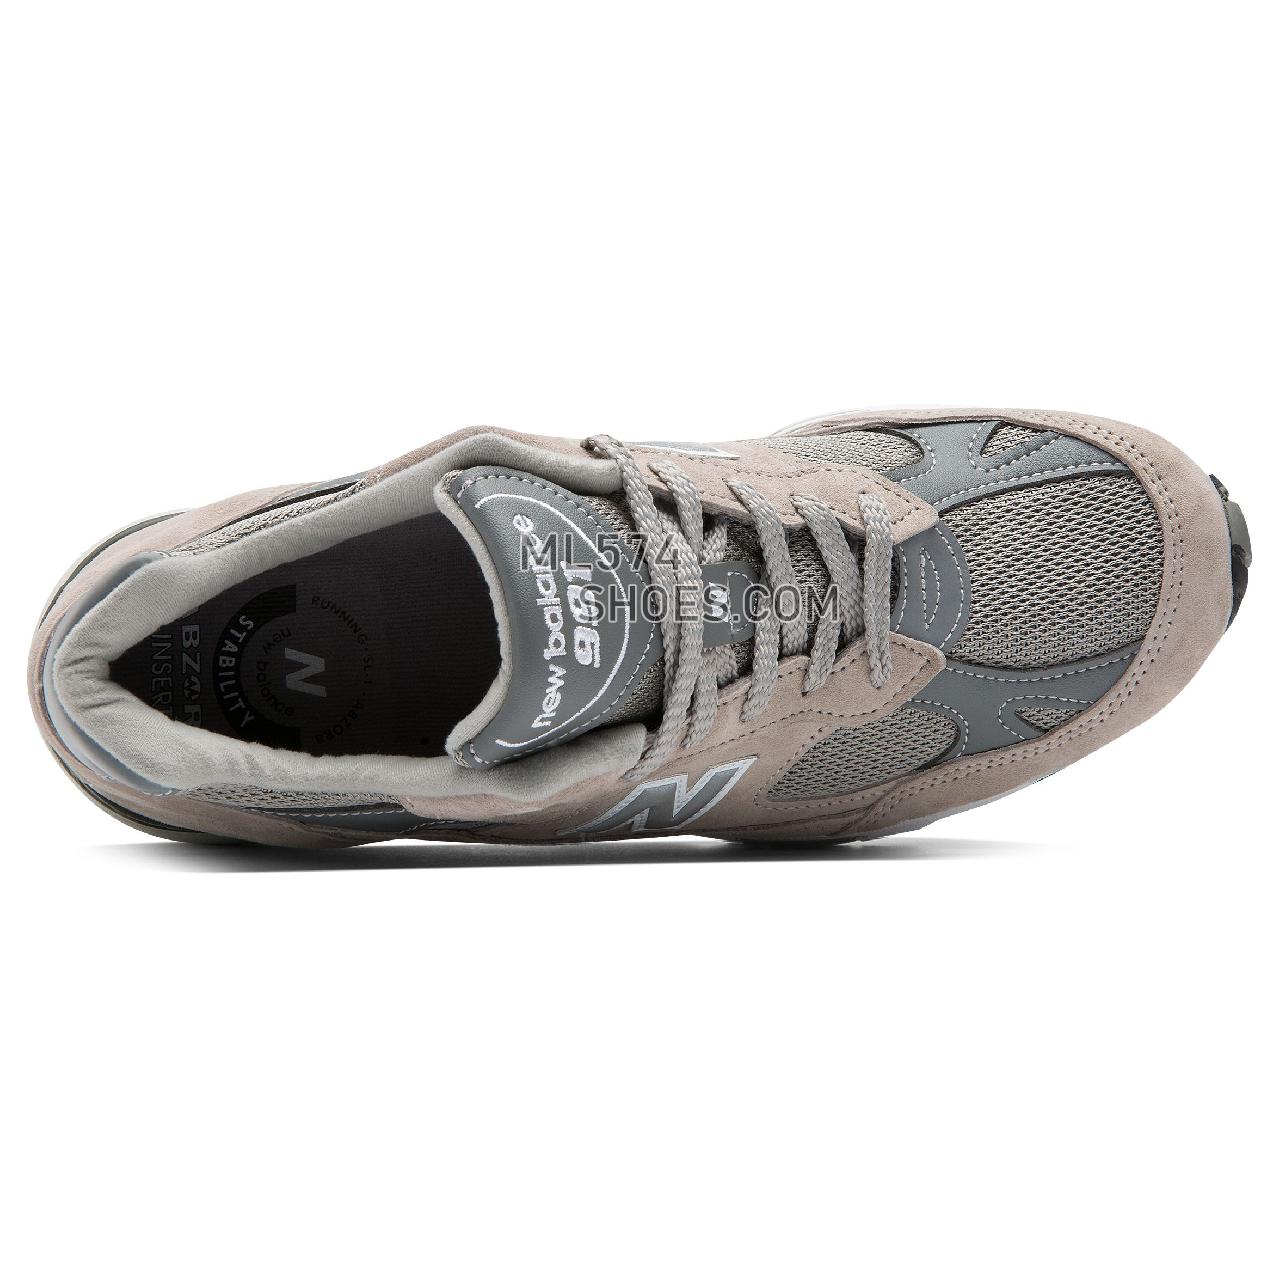 New Balance Made in UK 991 Leather - Men's Leather 991 - Grey - M991GL